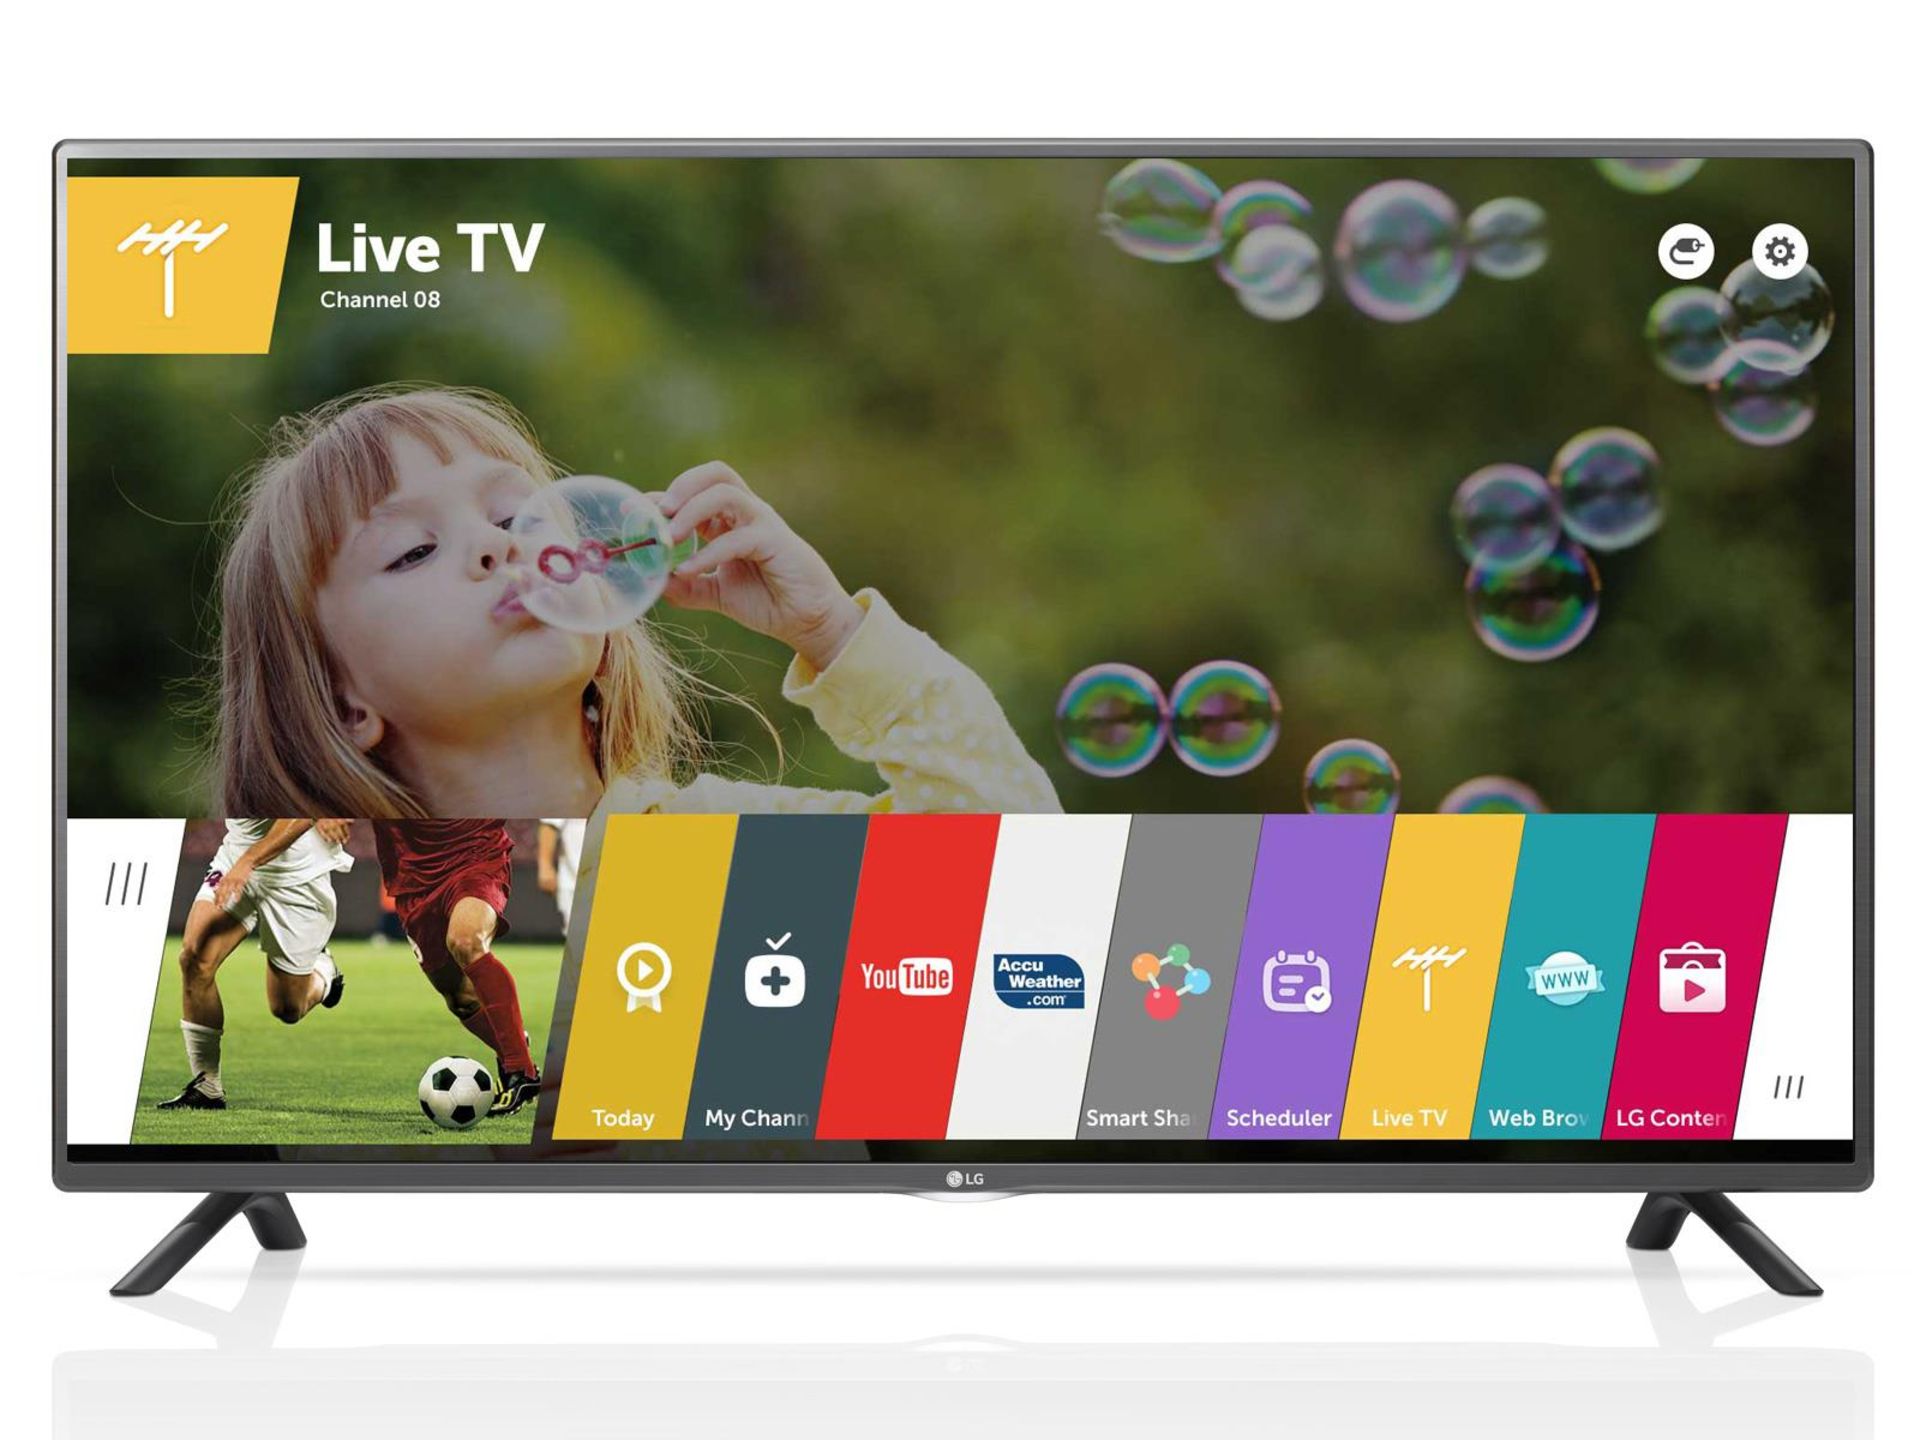 V Grade A 55" FULL HD LED SMART TV WITH FREEVIEW HD & WIFI & WEBOS 2.0 55LF592V (Item Will Be